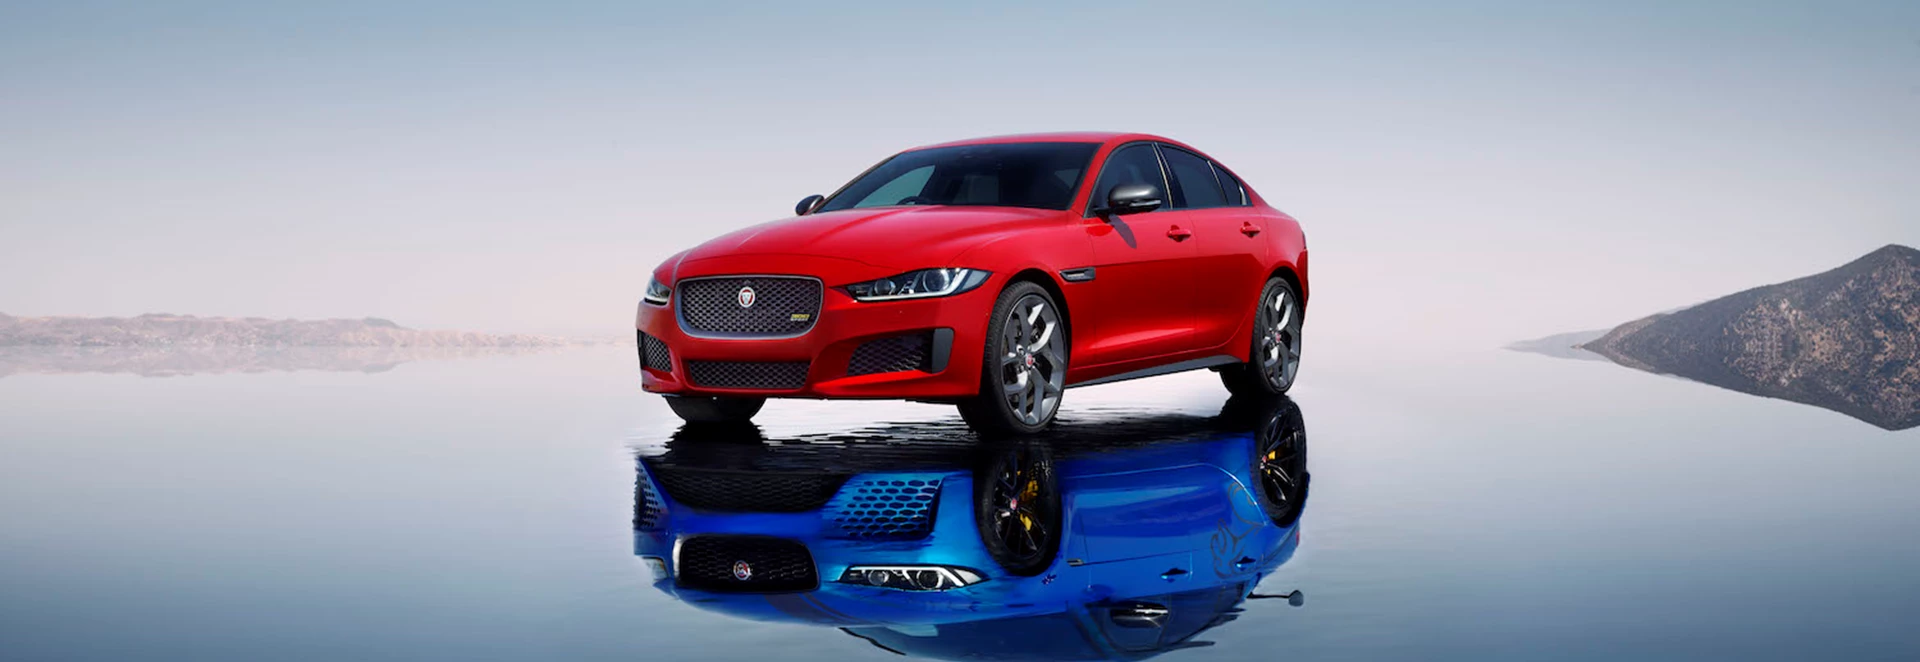 Buyer’s guide to the Jaguar XE